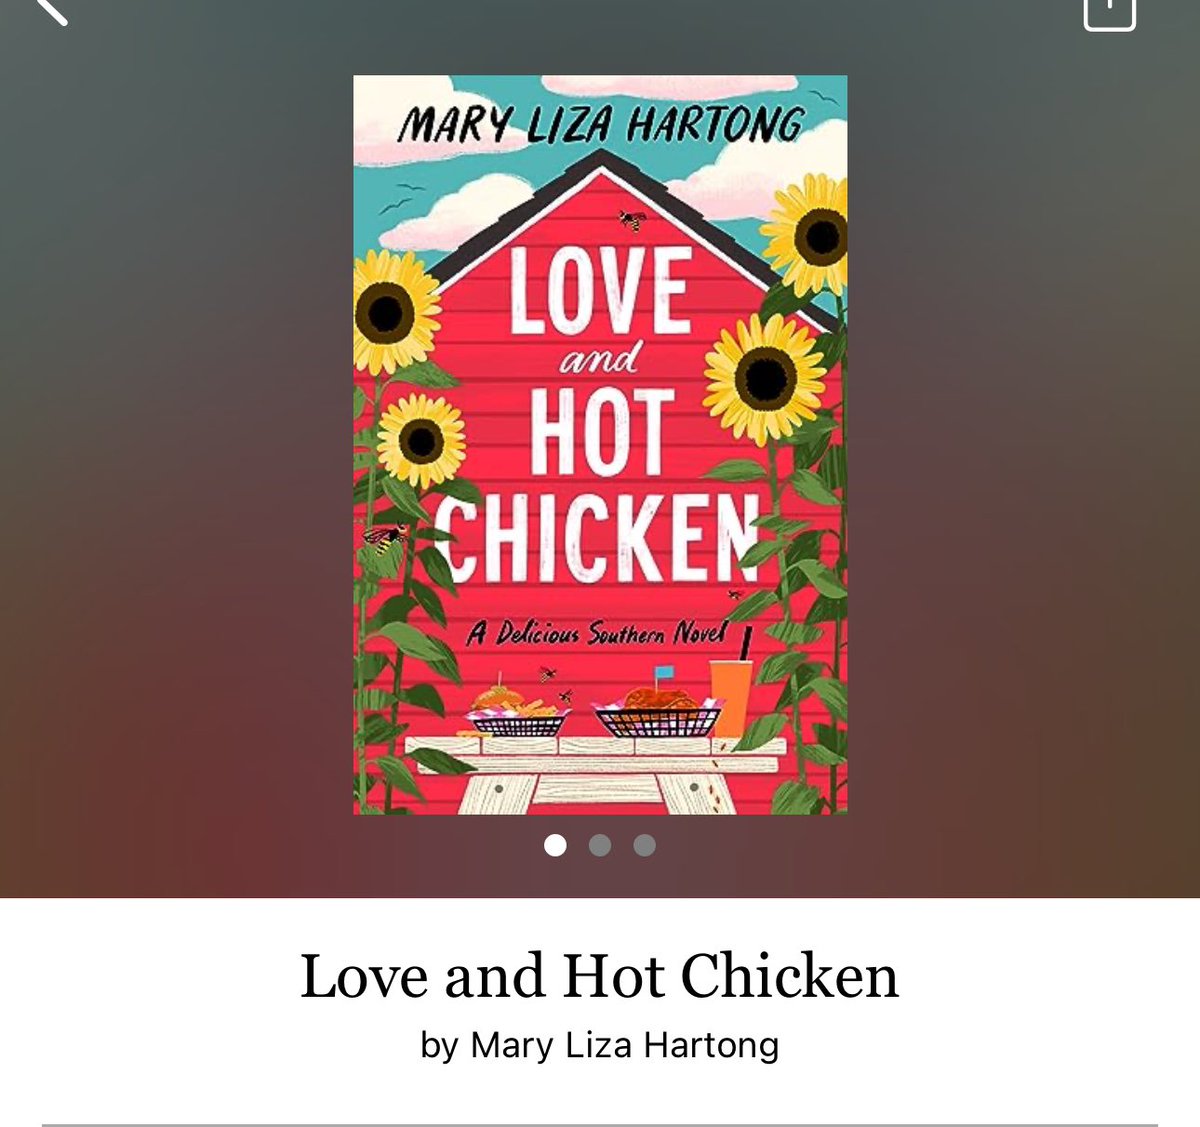 Love and Hot Chicken by Mary Liza Hartong 

#LoveAndHotChicken by #MaryLizaHartong #6305 #24chapters #272pages #454of400 #NewRelease #Audiobook #92for23 #ChickieShak #PJAndBooj #april2024 #clearingoffreadingshelves #whatsnext #readitquick